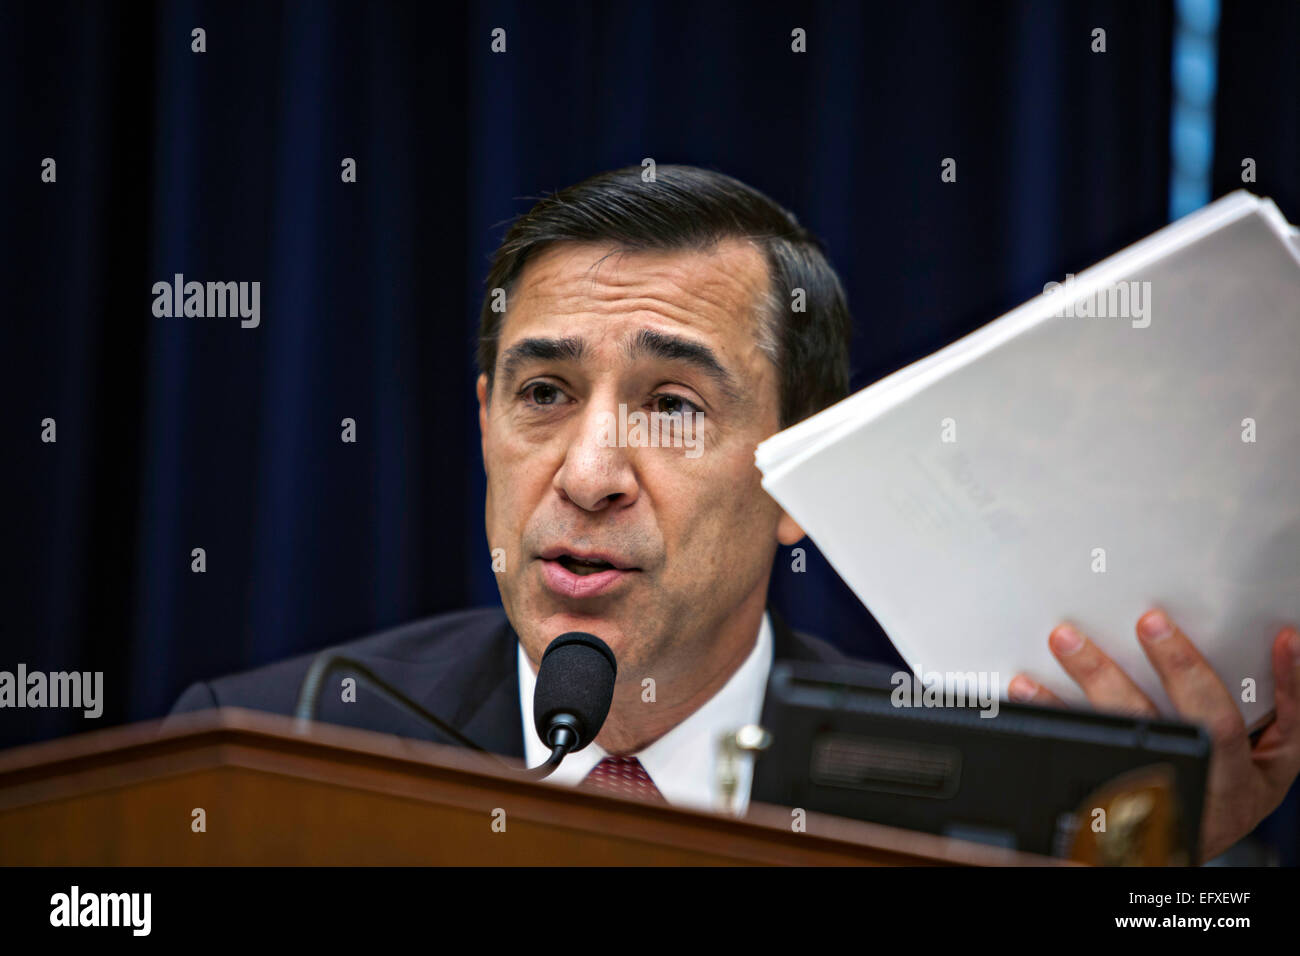 House Oversight and Government Reform Committee Chairman Darrell Issa during hearings on U.S. Foreign Assistance Accountability on Capitol Hill August 2, 2013 in Washington, DC. Stock Photo